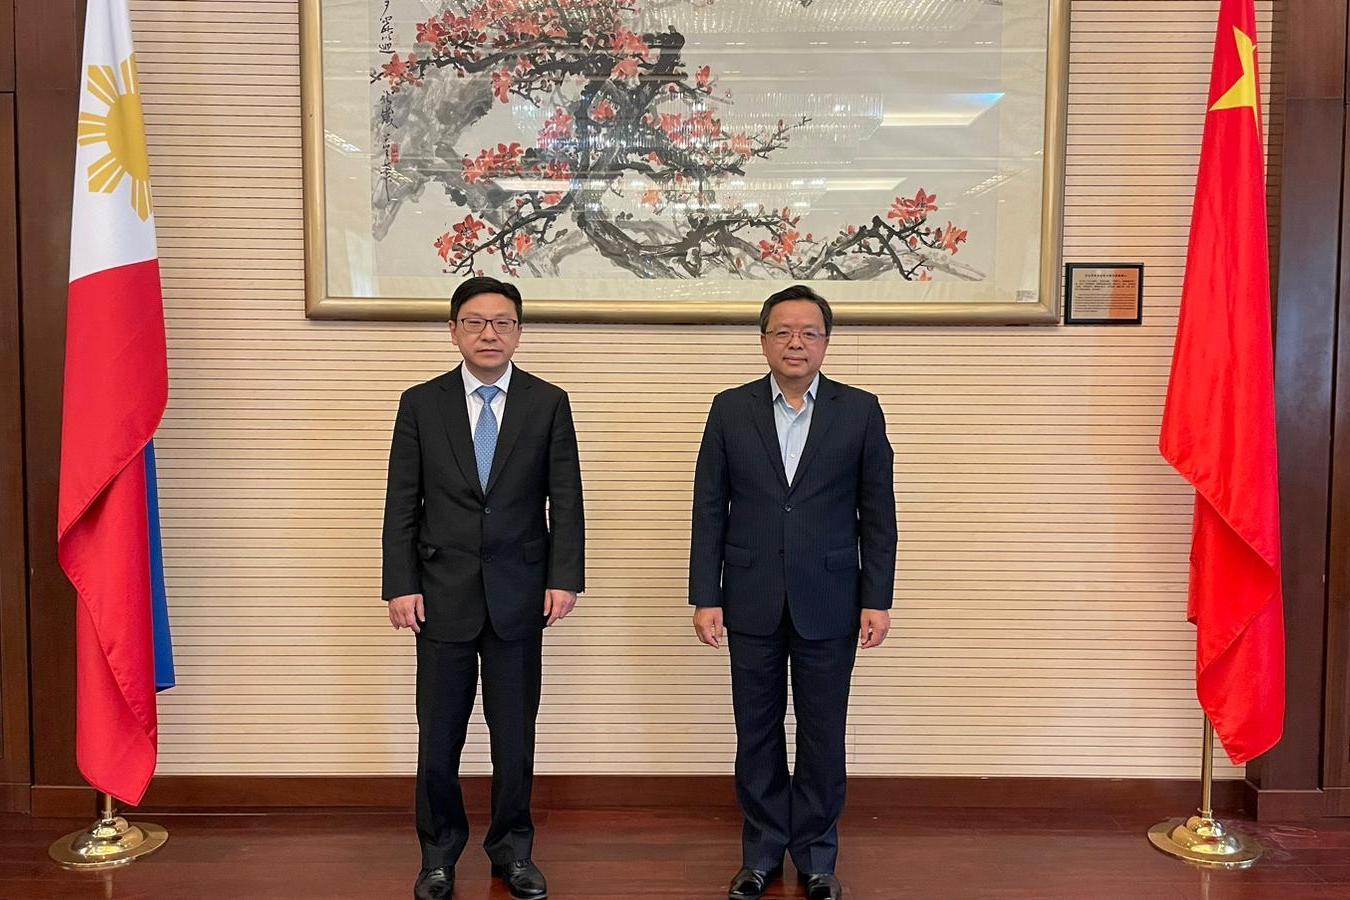 The Secretary for Labour and Welfare, Mr Chris Sun, met with the Chinese Ambassador to the Philippines, Mr Huang Xilian, this afternoon (January 10) during his visit to Manila, the Philippines, and updated him on the latest labour market and economic situation in Hong Kong. Photo shows Mr Sun (left) and Mr Huang (right).